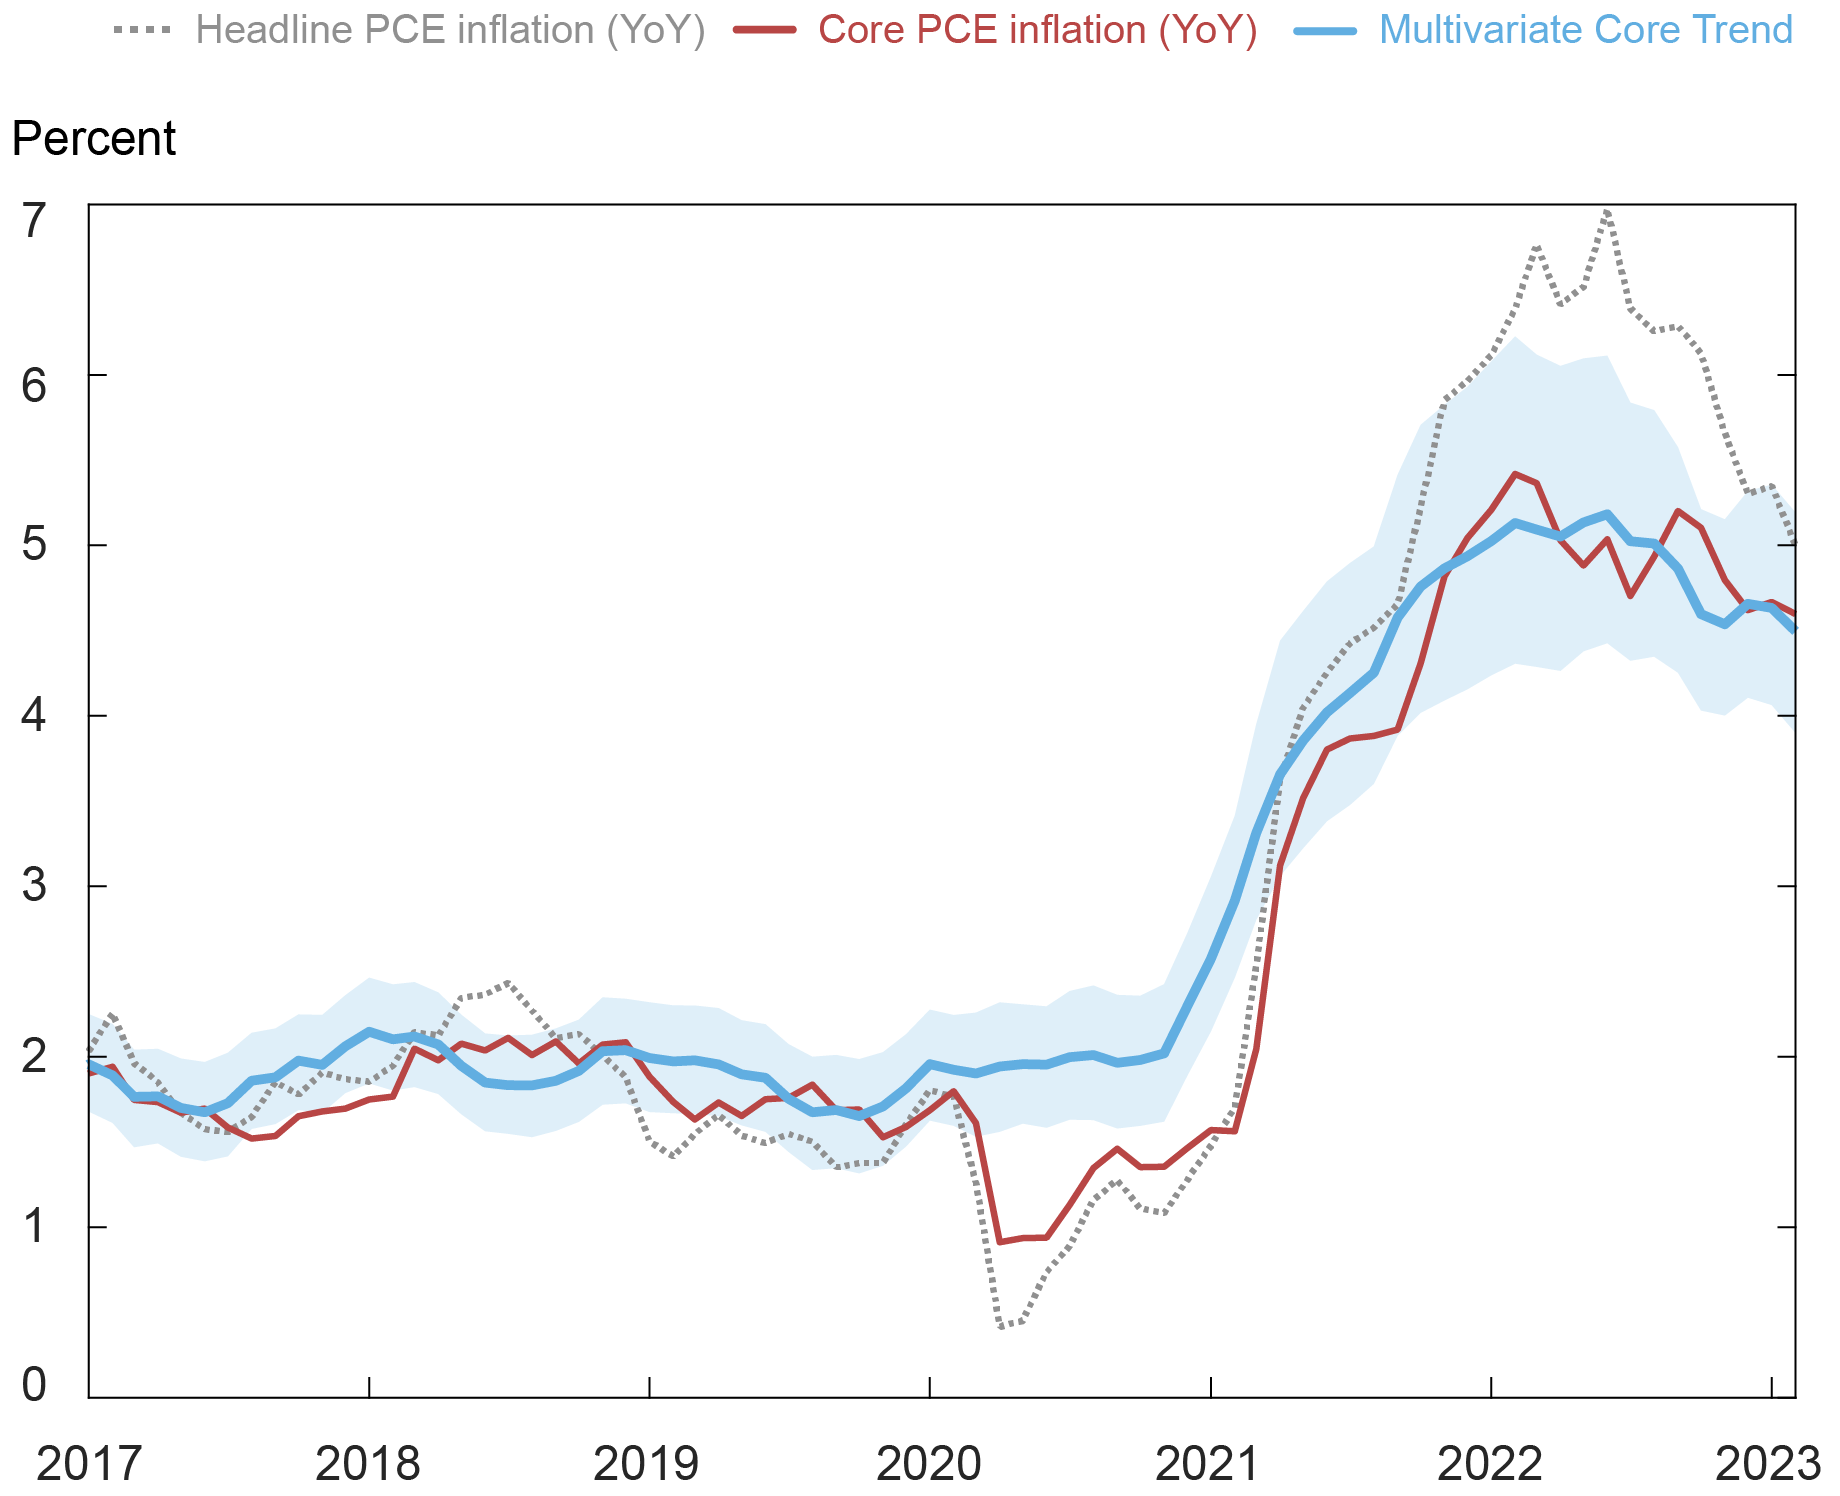 Liberty Street Economics chart showing the Multivariate Core Trend (MCT) estimates alongside twelve-month headline and core PCE inflation. The MCT declined slightly to 4.5 percent in February from January’s revised value of 4.6 percent. 